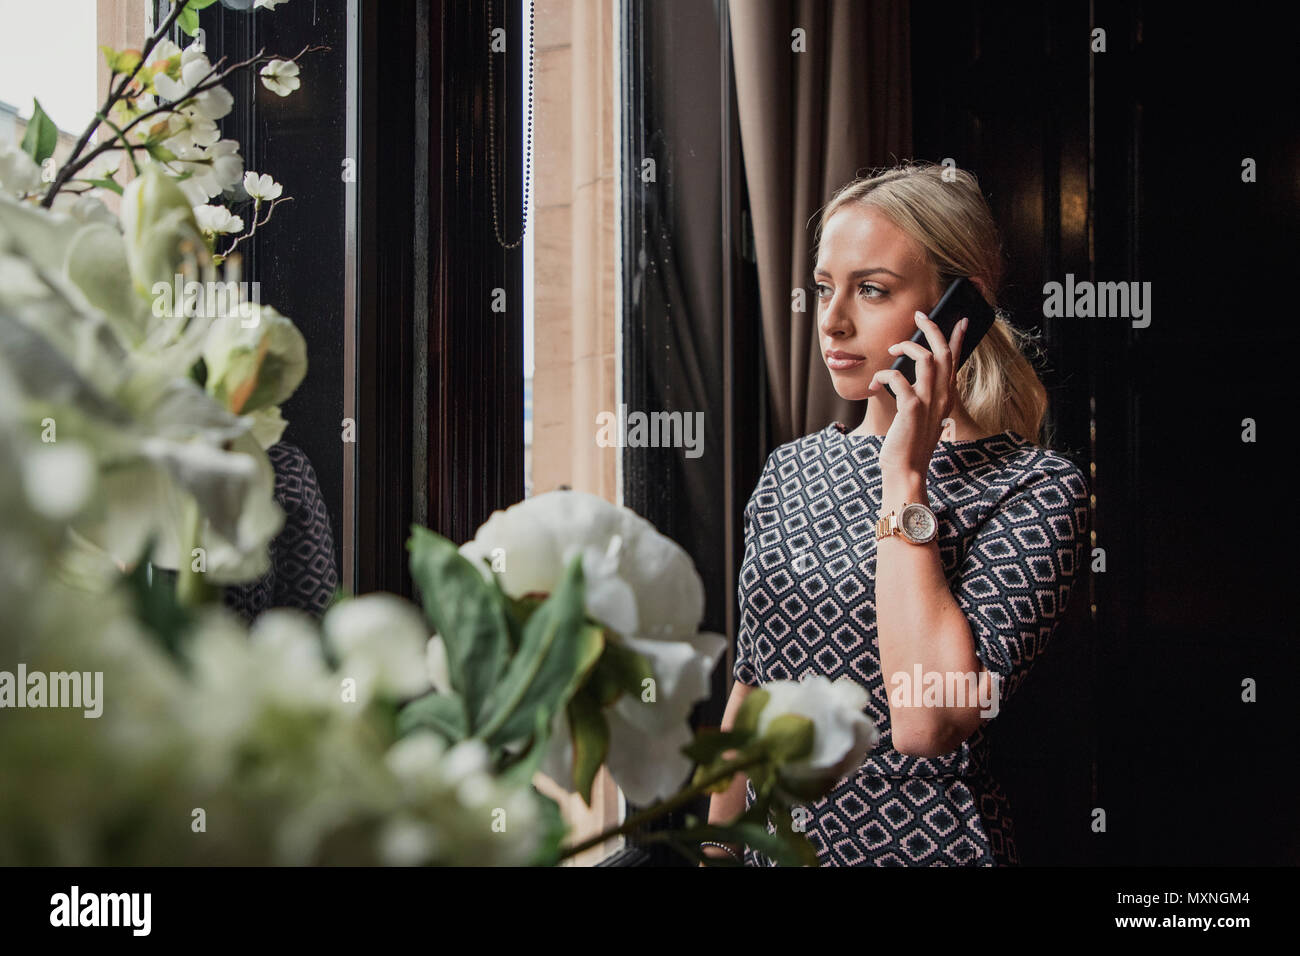 Young adult businesswoman standing looking out the window. She is making an important phone call at work and has a serious facial expression. Stock Photo